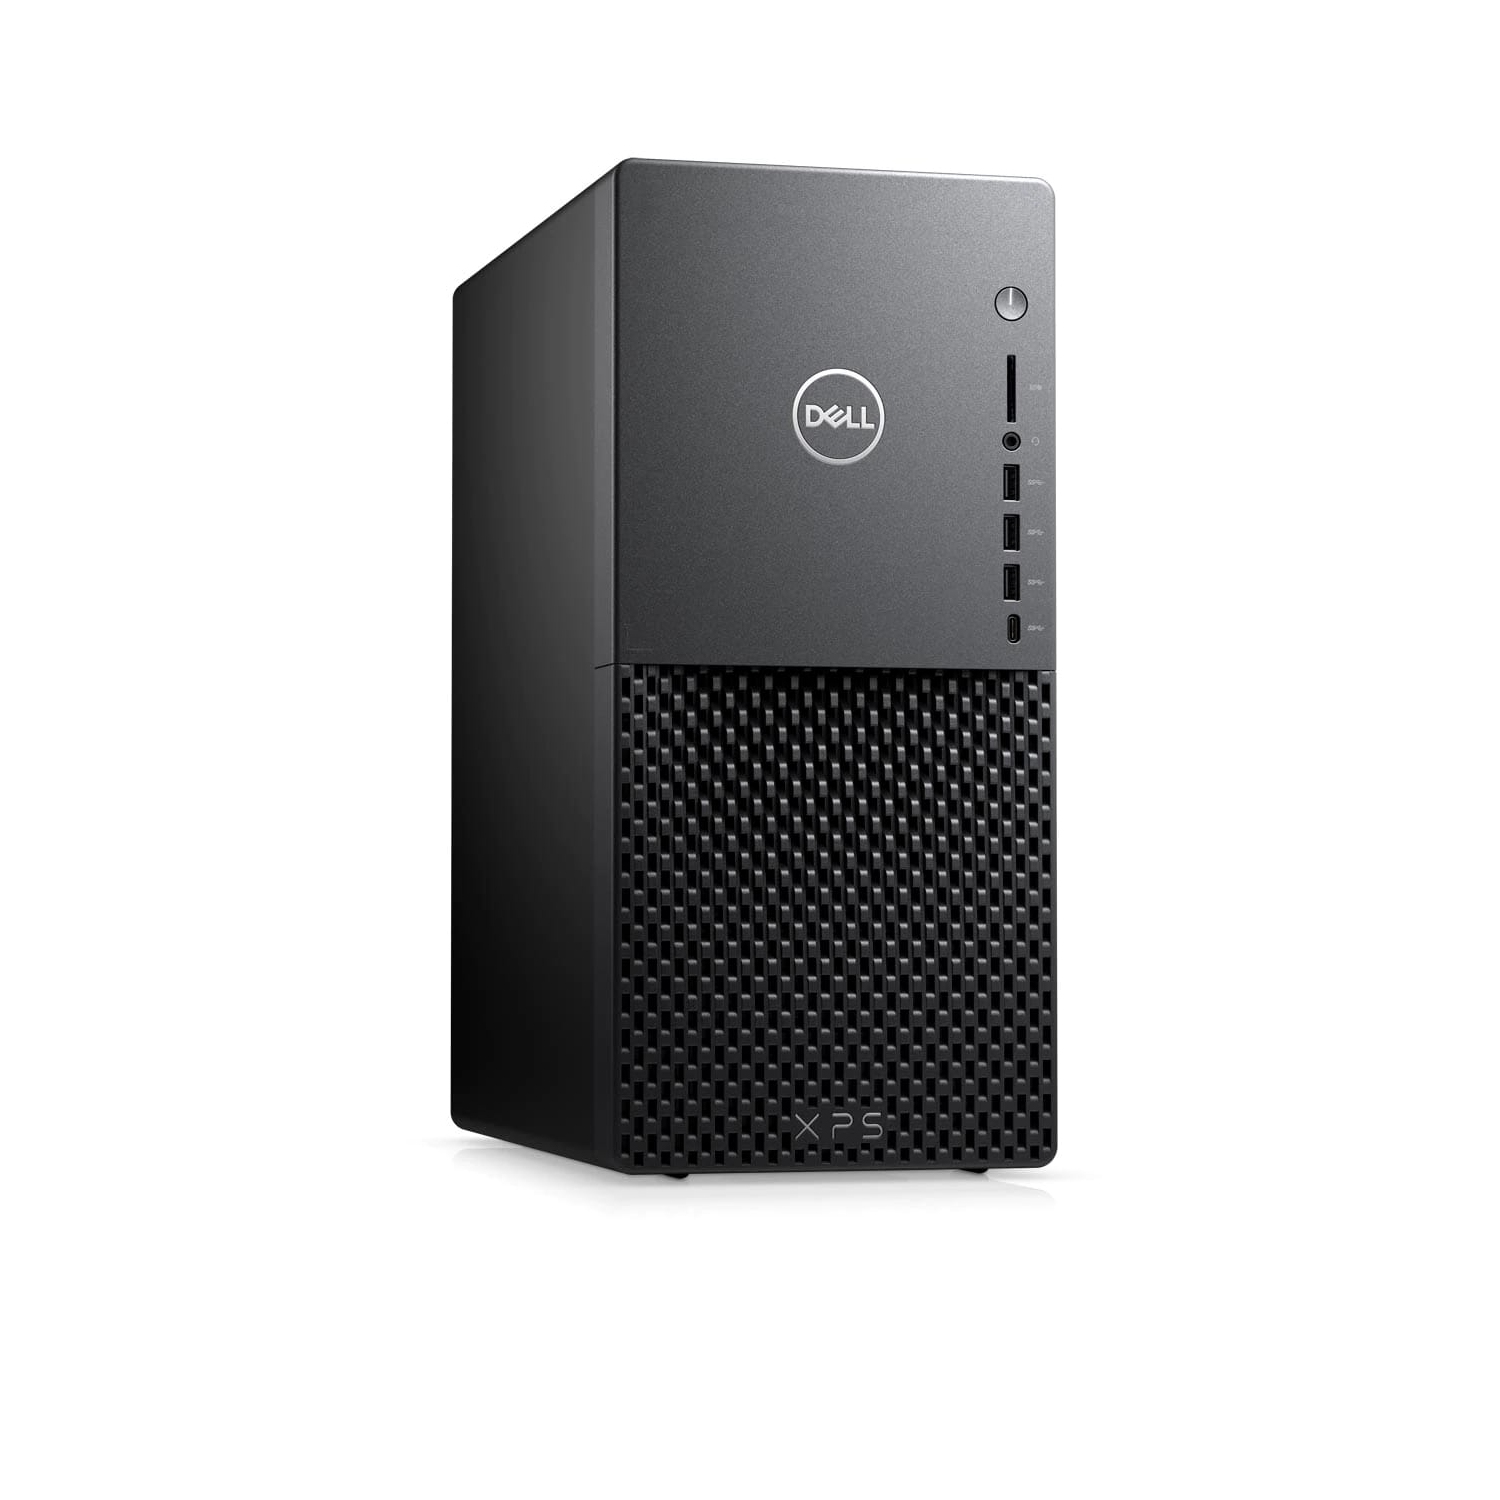 Refurbished (Excellent) - Dell XPS 8940 Desktop (2020) | Core i7 - 2TB HDD + 256GB SSD - 16GB RAM - RX 5700 | 8 Cores @ 4.9 GHz - 11th Gen CPU Certified Refurbished